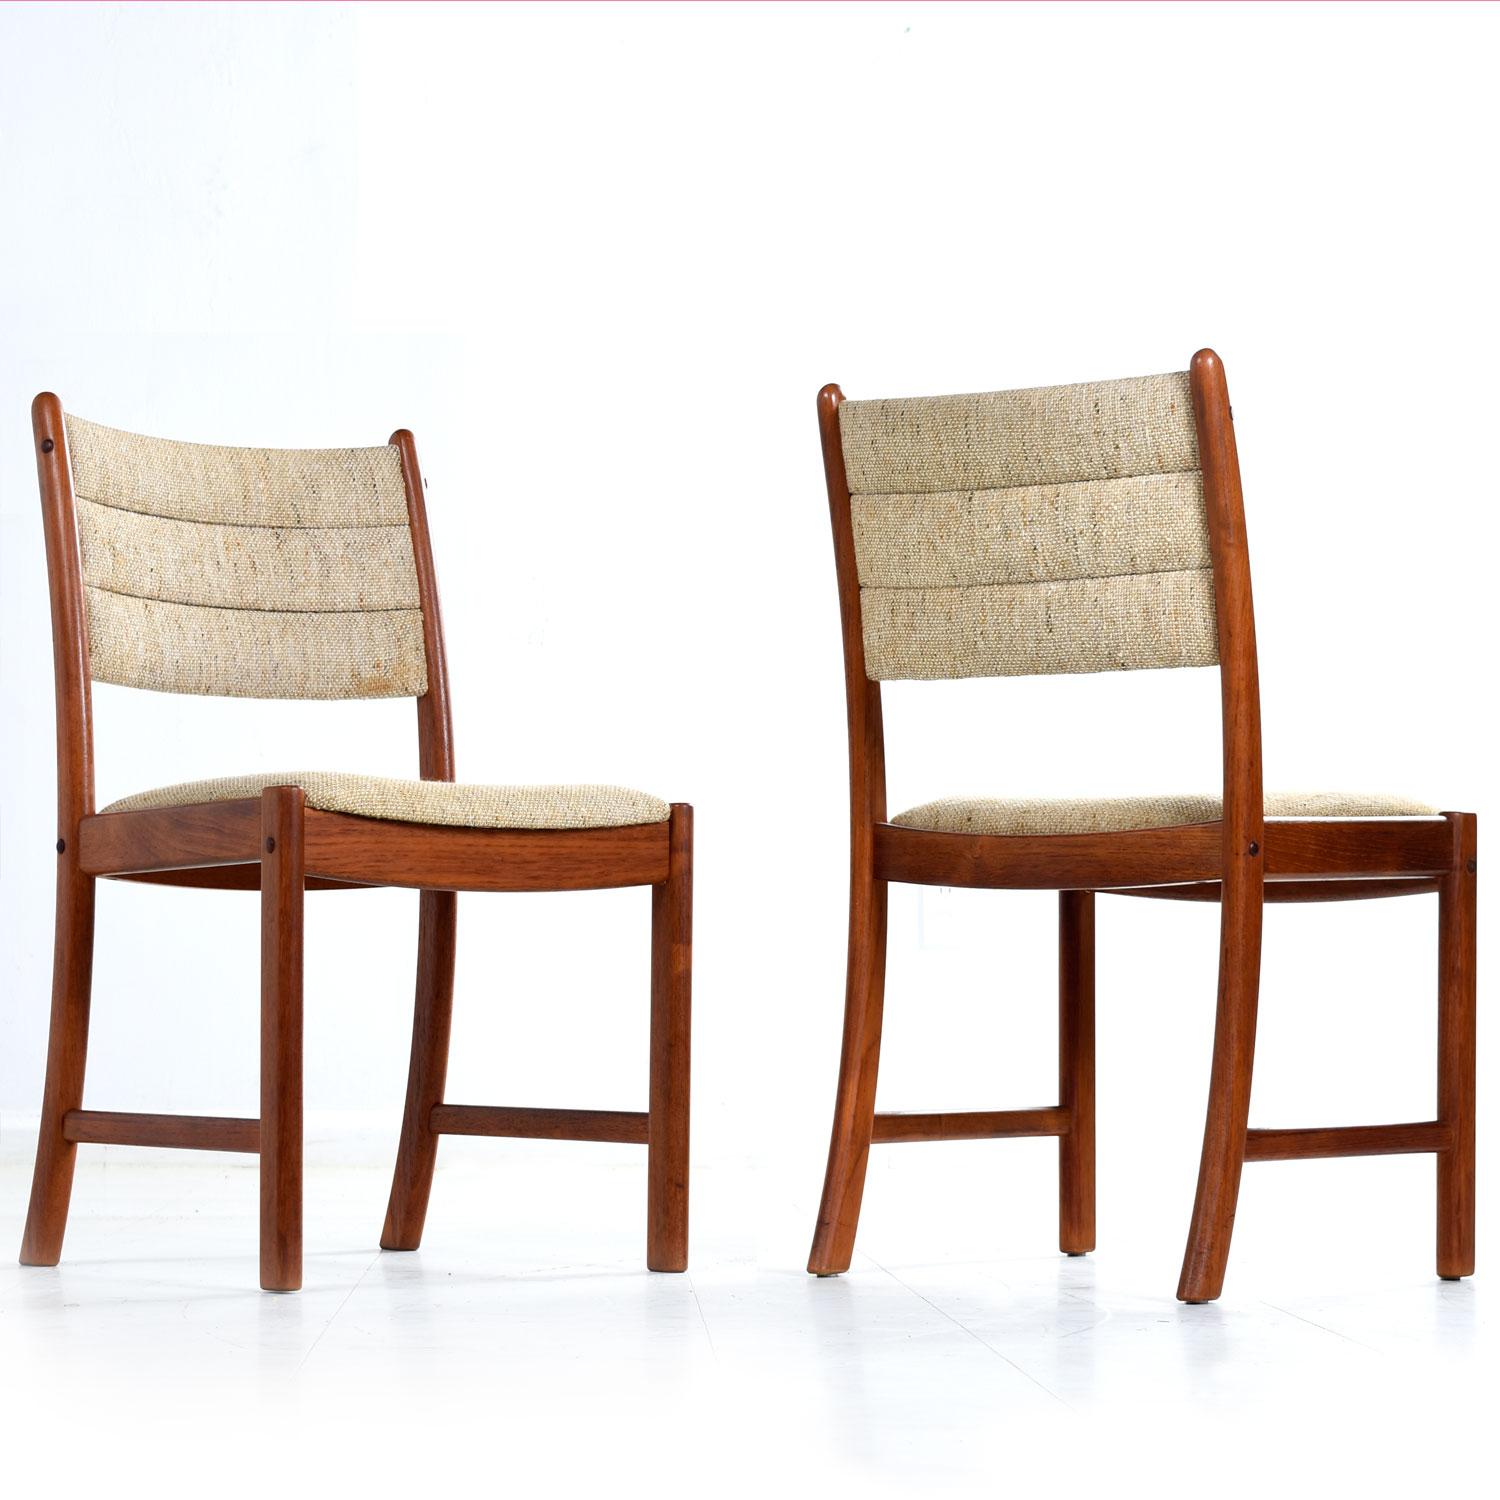 A set of ten solid teak dining chairs by Johannes Andersen for Uldum Møbelfabrik. The several decades old solid teak has a rich amber patina that bounces beautifully against the original wool fabric. The low back profile features two rows of